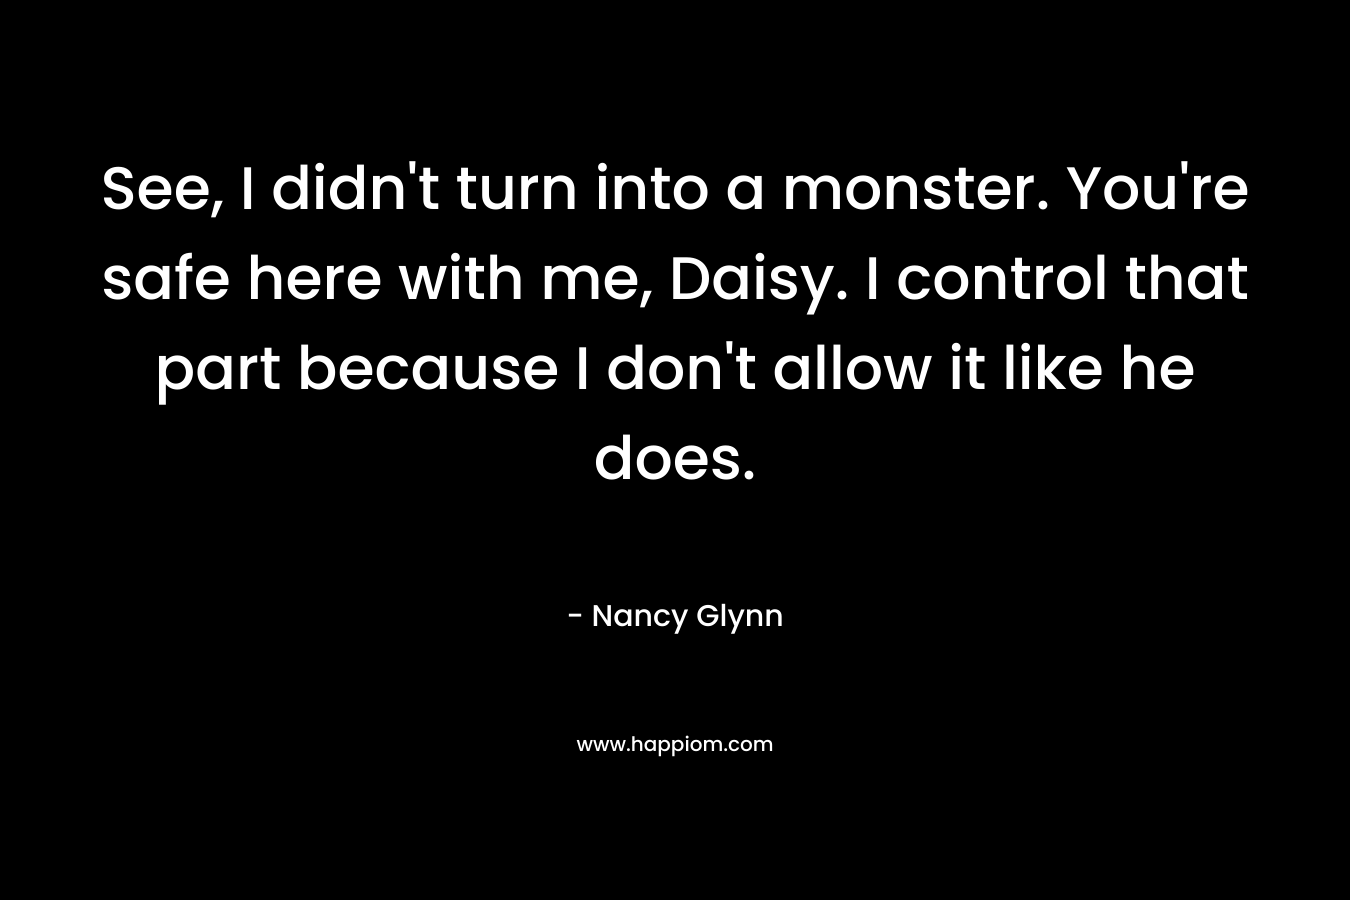 See, I didn’t turn into a monster. You’re safe here with me, Daisy. I control that part because I don’t allow it like he does. – Nancy Glynn